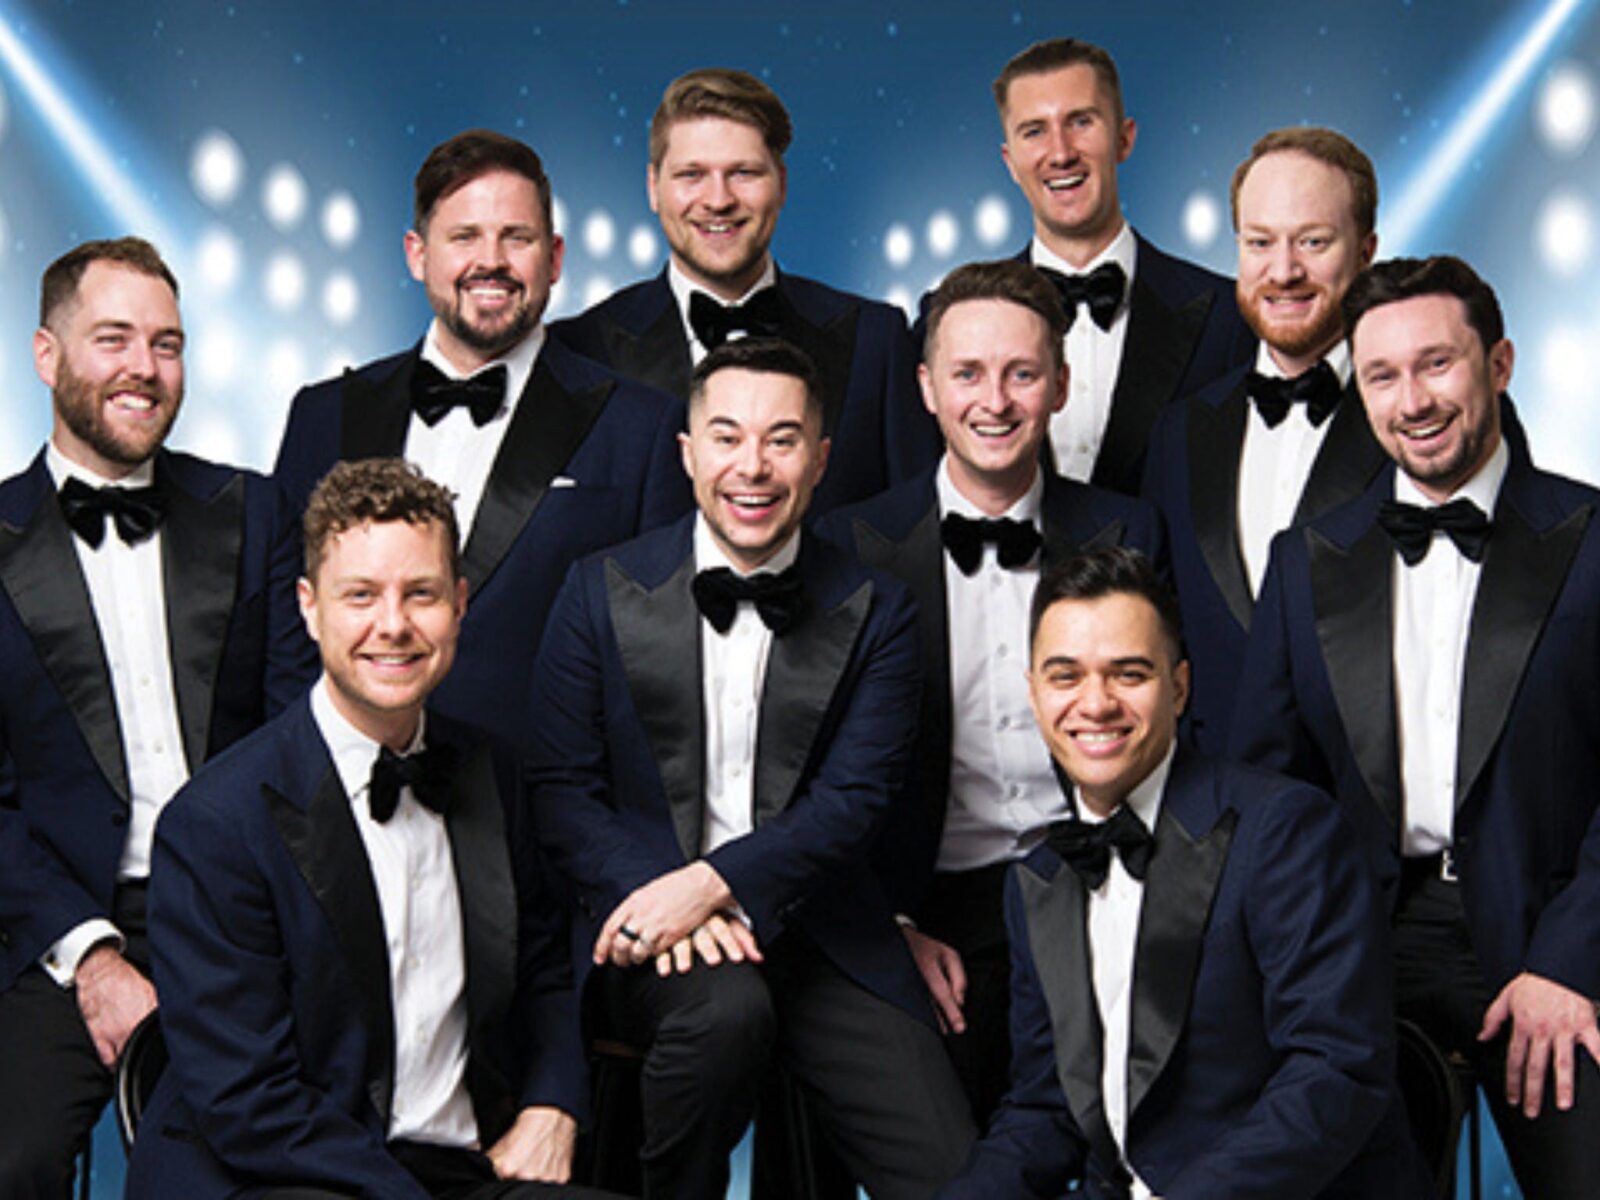 The TEN Tenors Greatest Hits Tour Event Wollongong